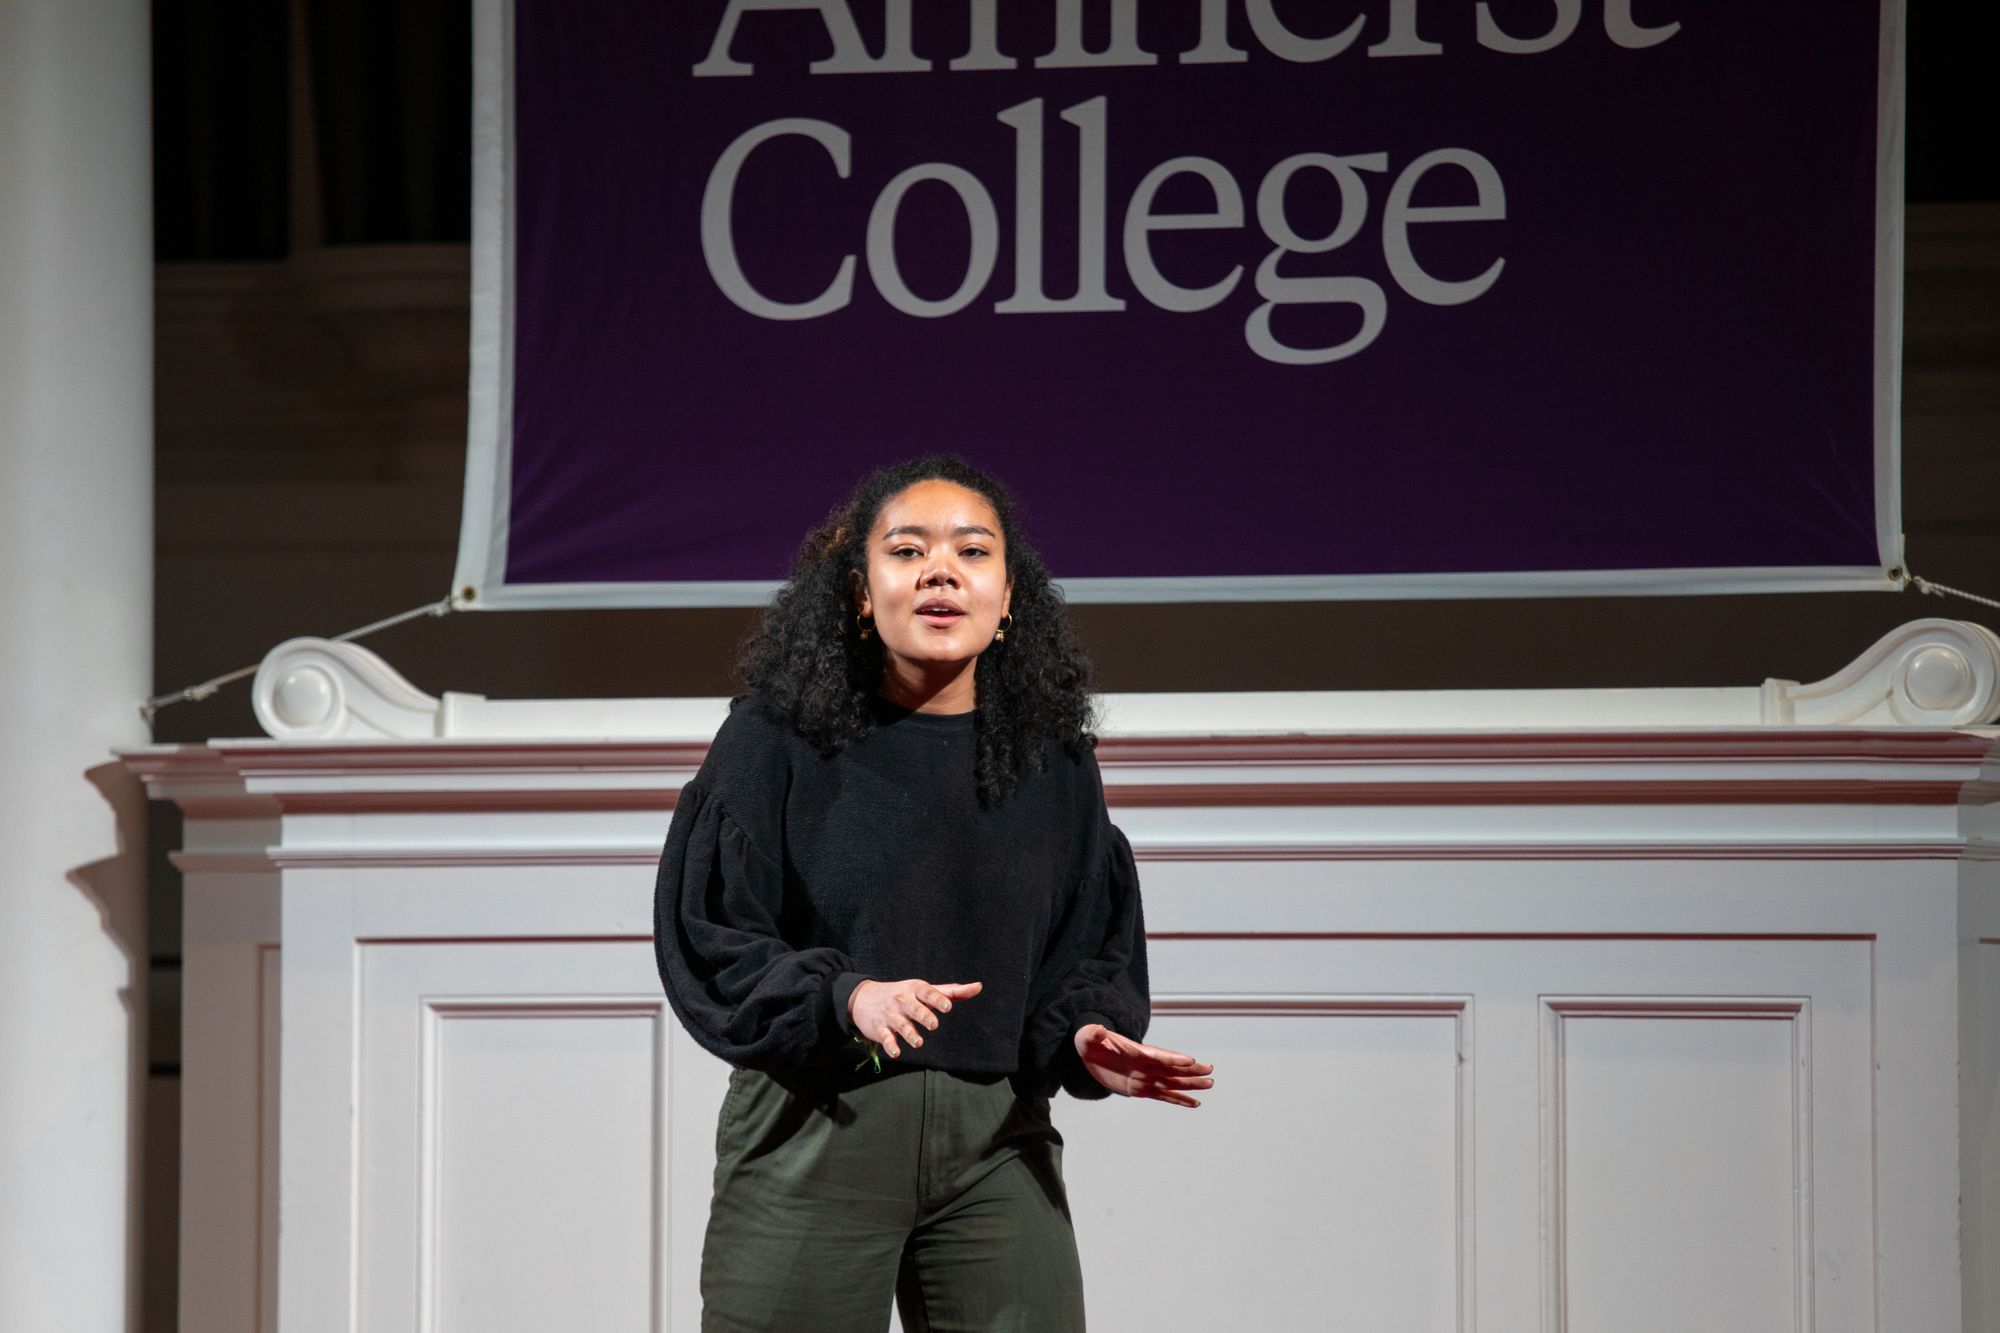 The image depicts Mia Griffin speaking and using hand gestures on the stage at Johnson Chapel.